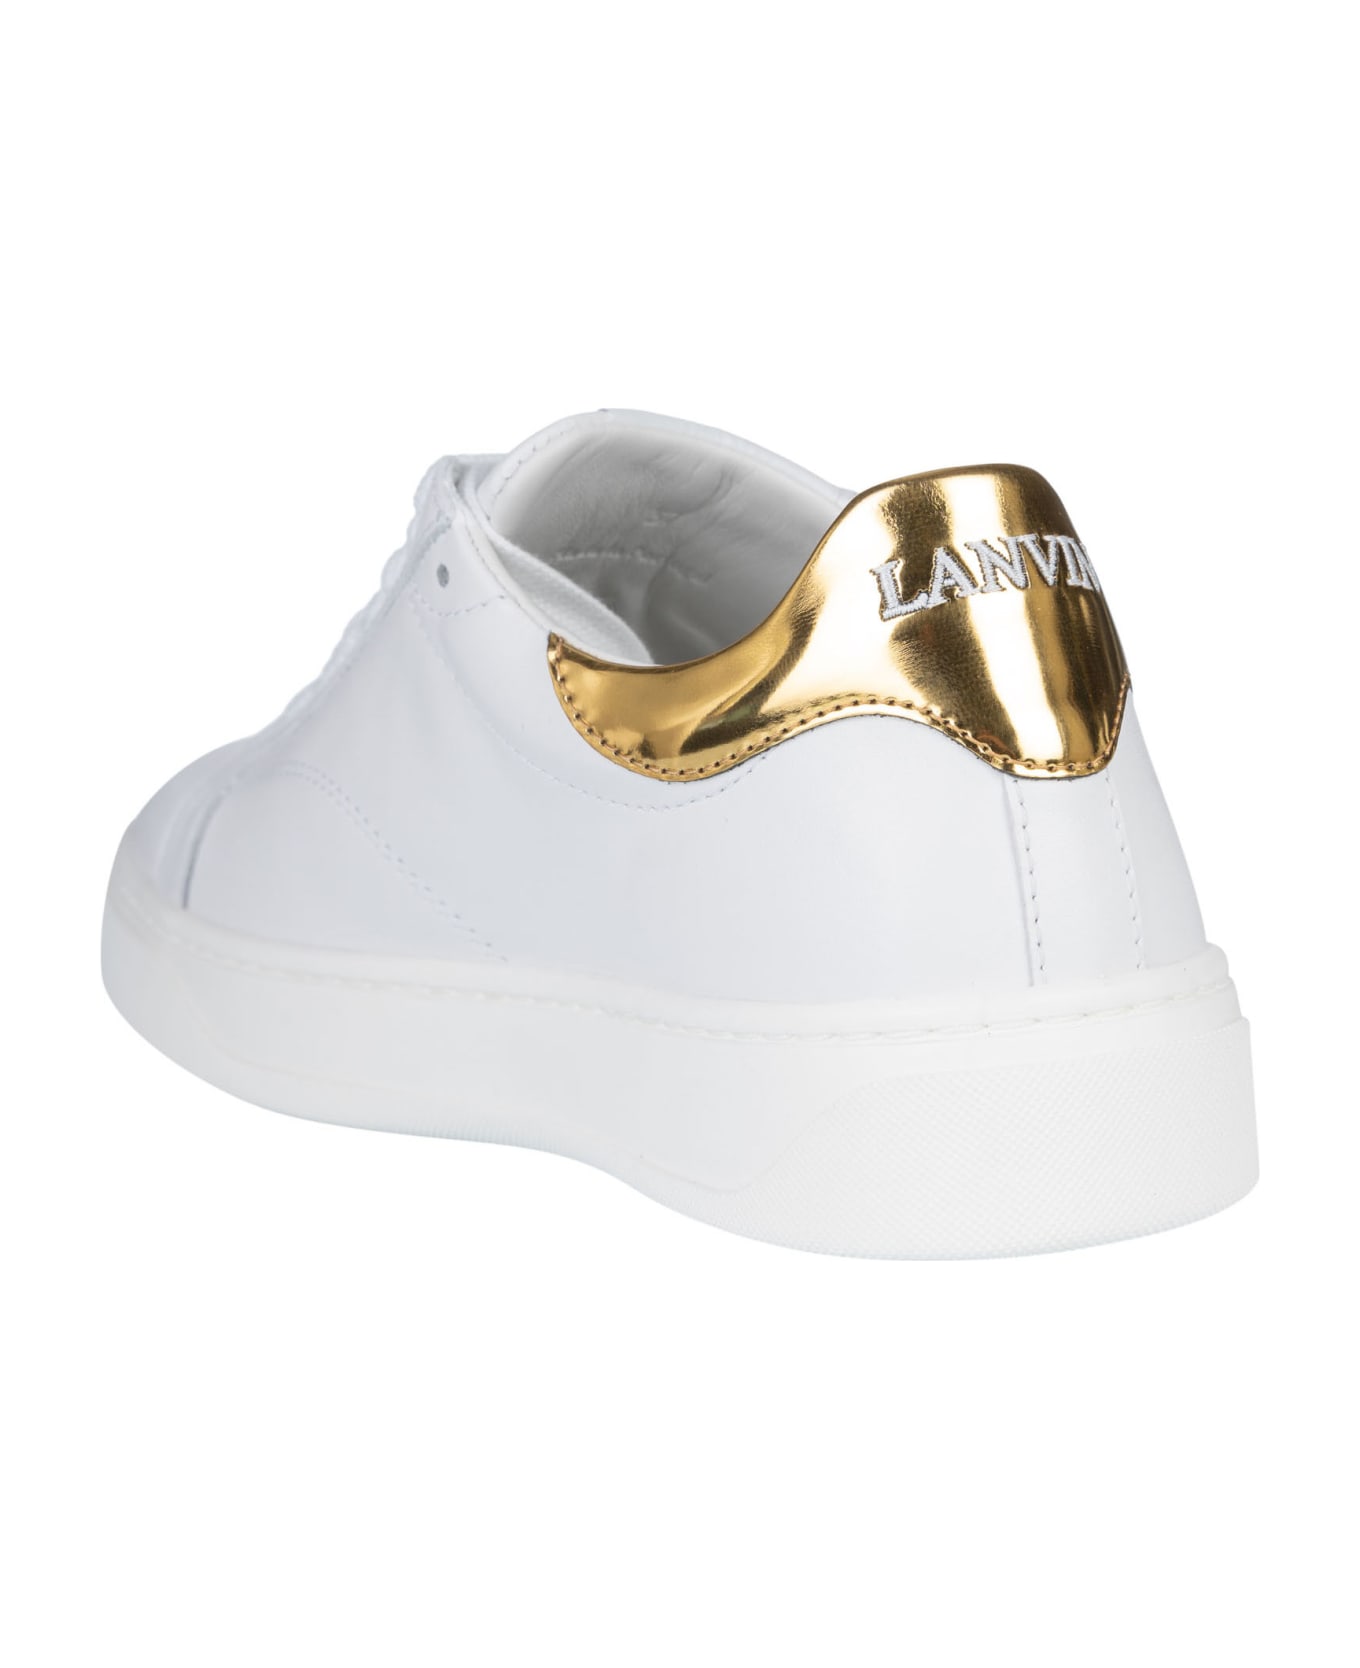 Lanvin Ddb0 Sneakers - White/Gold